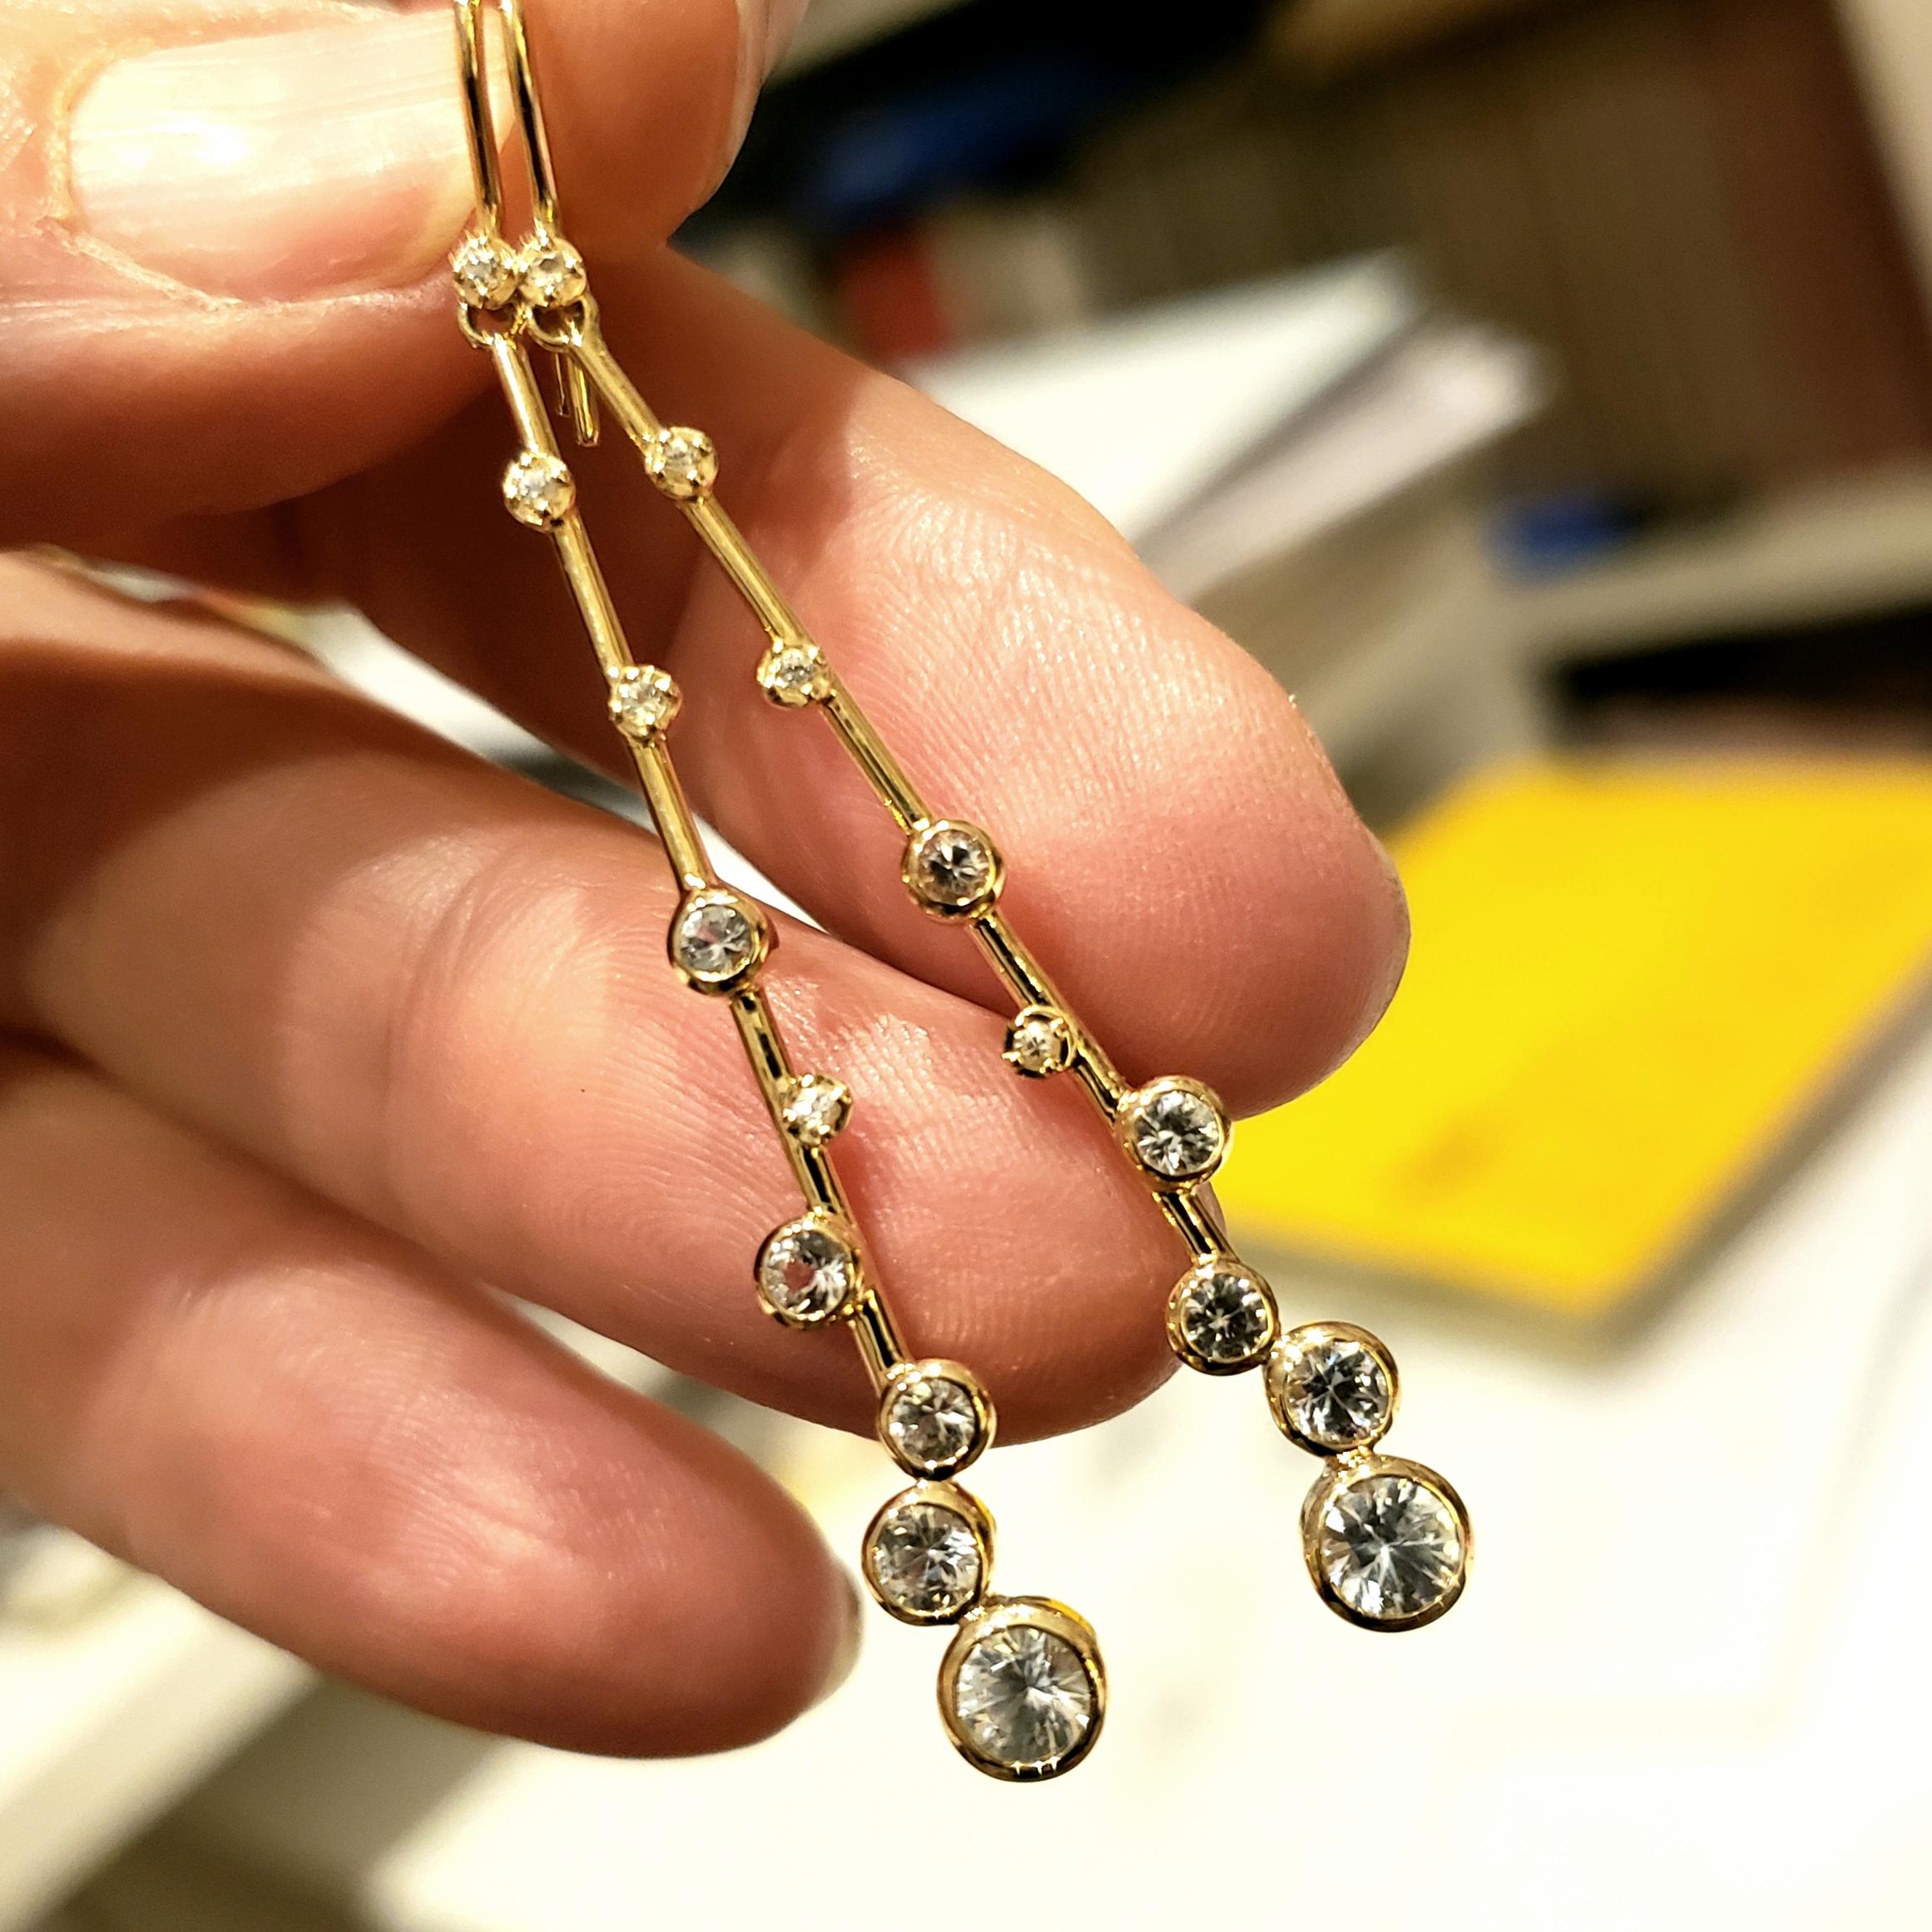 Women's Elongated Dangle Earrings in 14 Karat Gold with White Sapphires and Diamonds